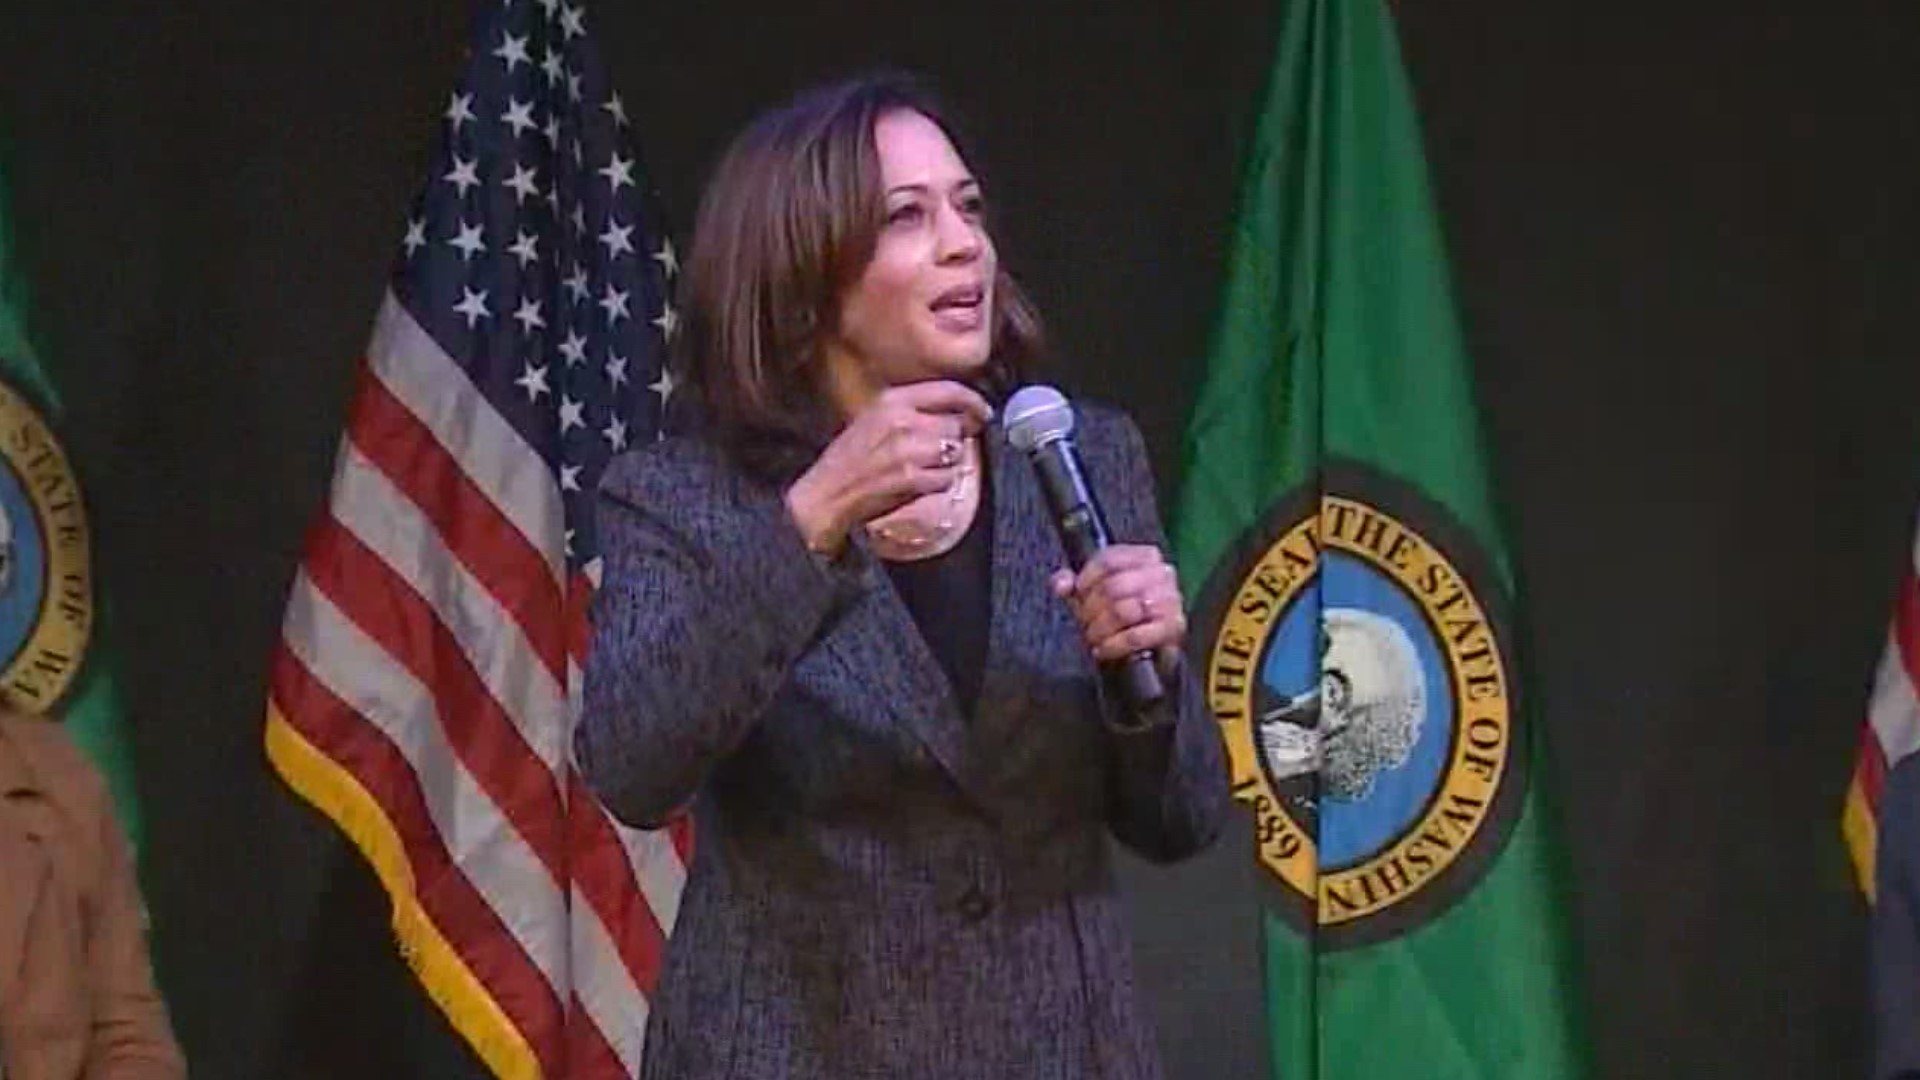 Democrats in Washington state are "ecstatic" about Joe Biden's running mate Kamala Harris. Republicans in the state called her "outside the mainstream."